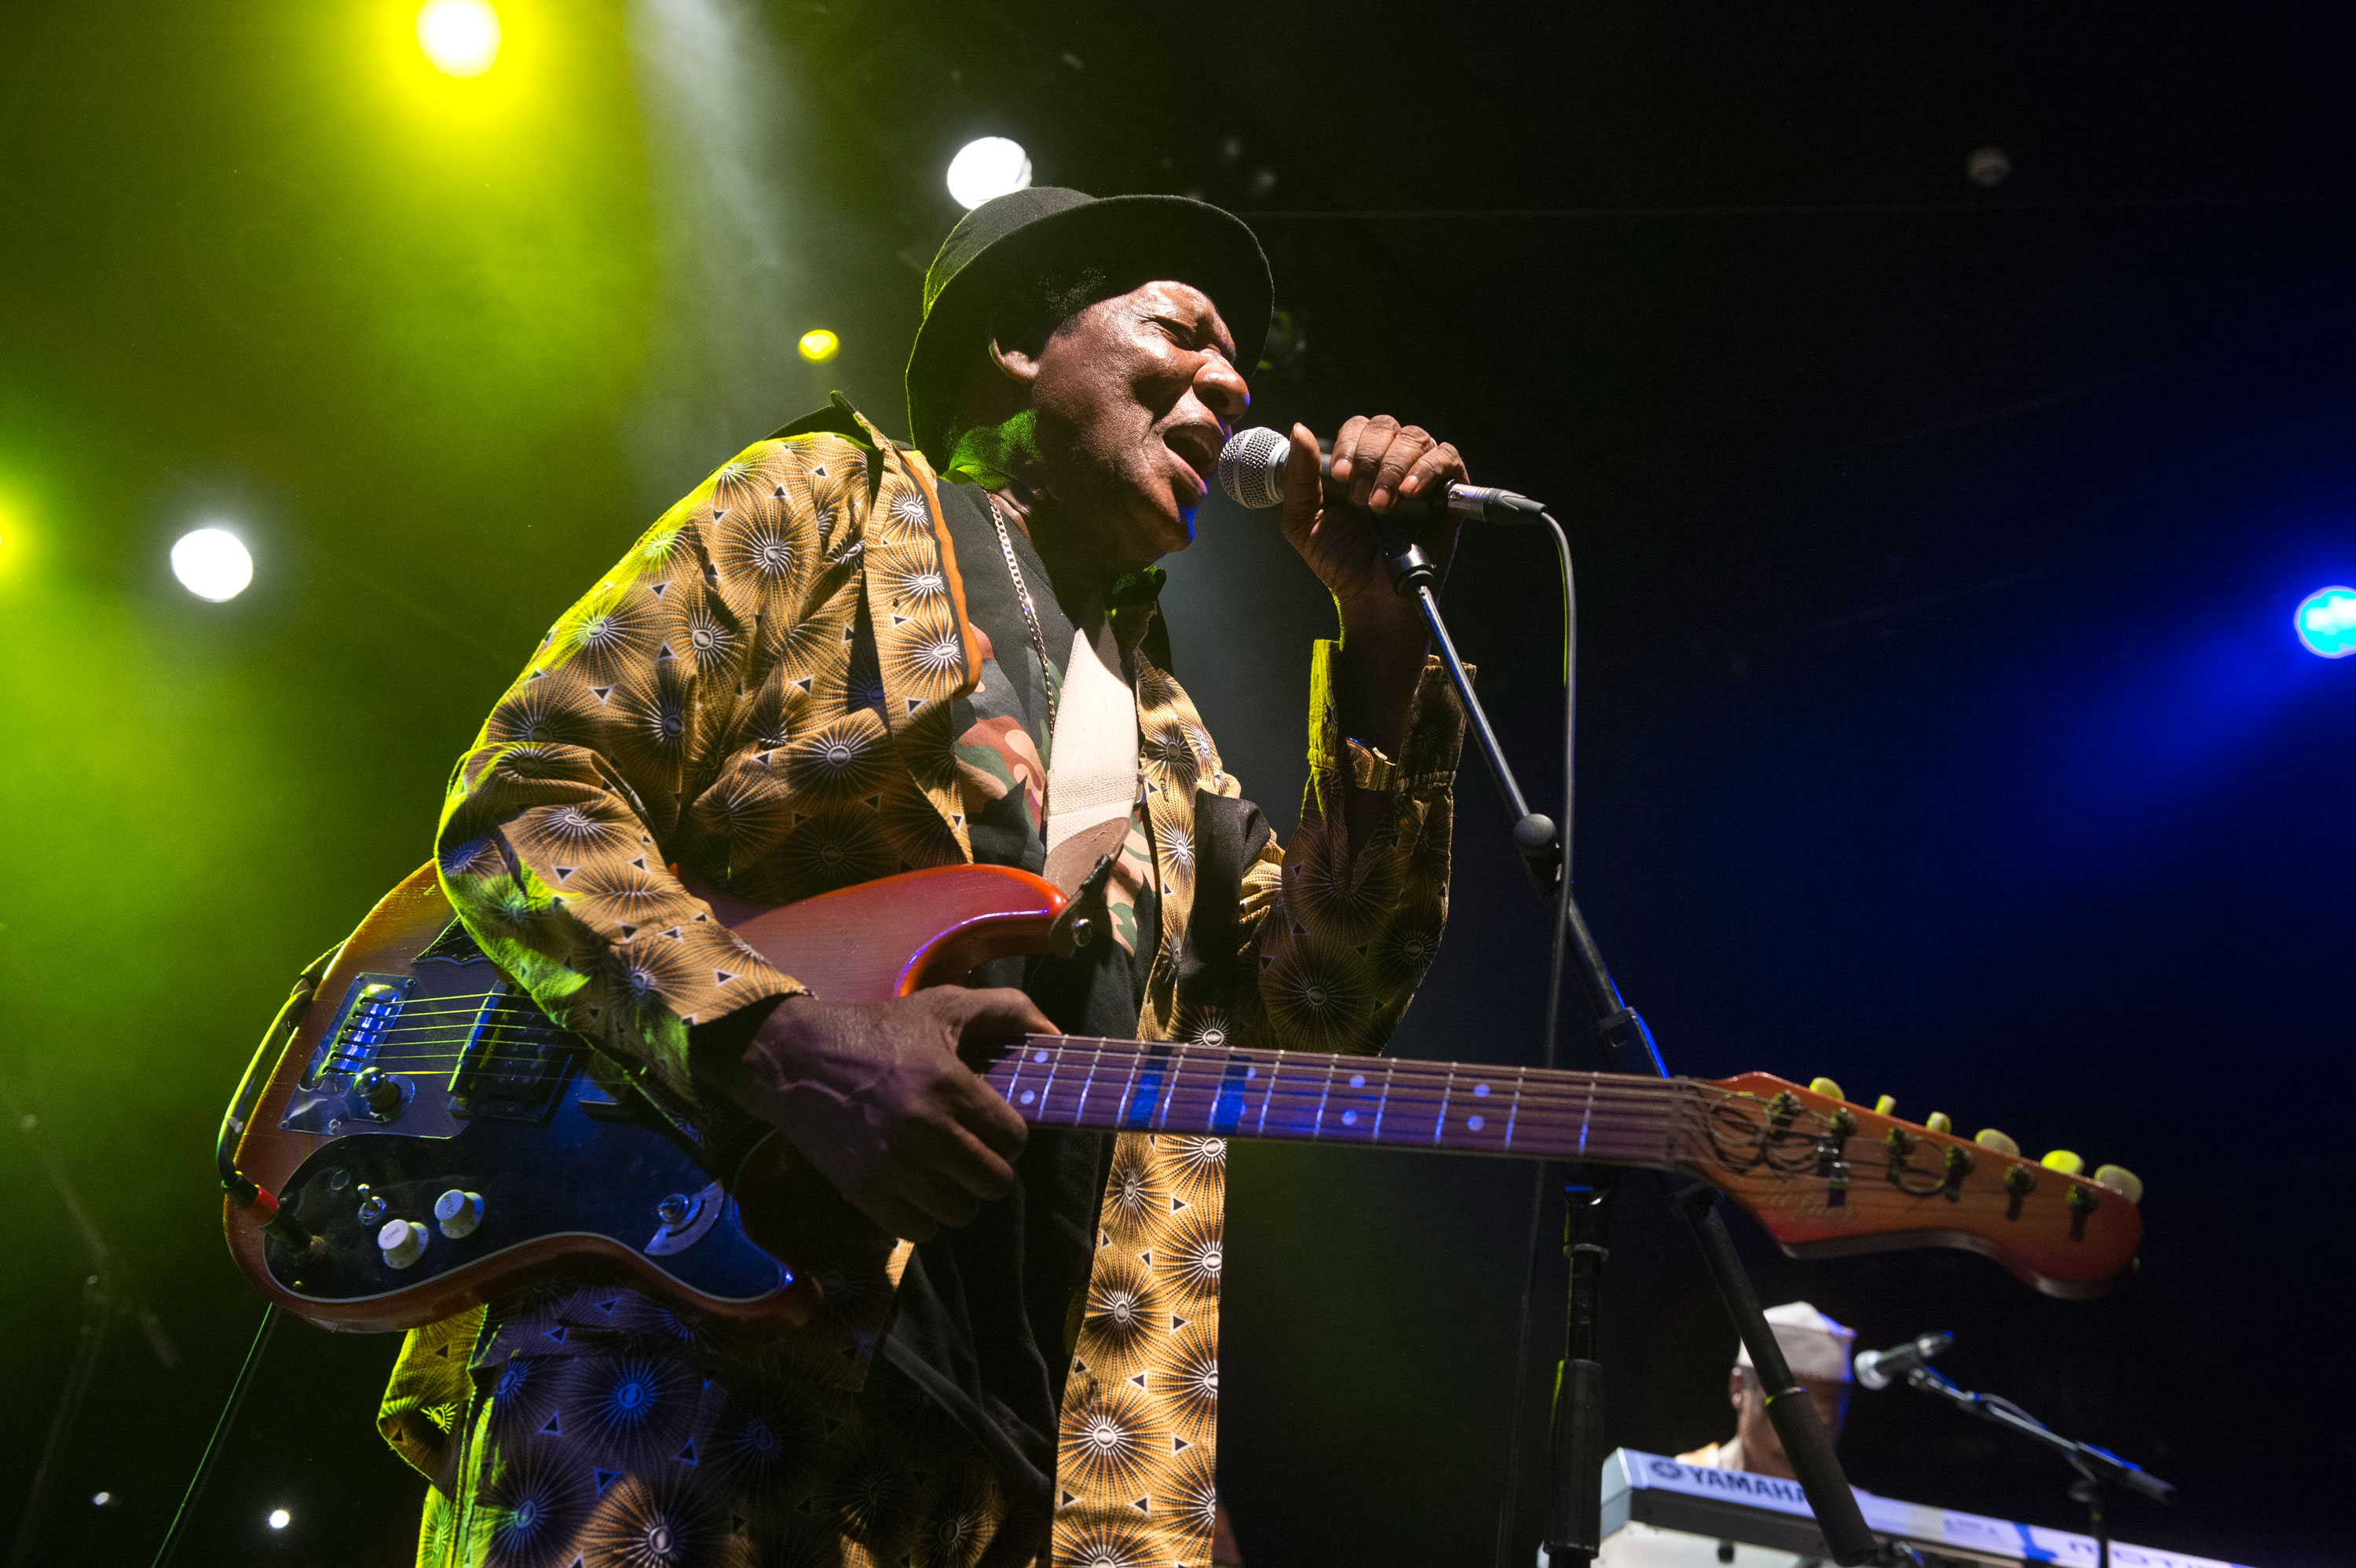 Ebo Taylor: The Ghanaian musician who helped put West African music on the world map